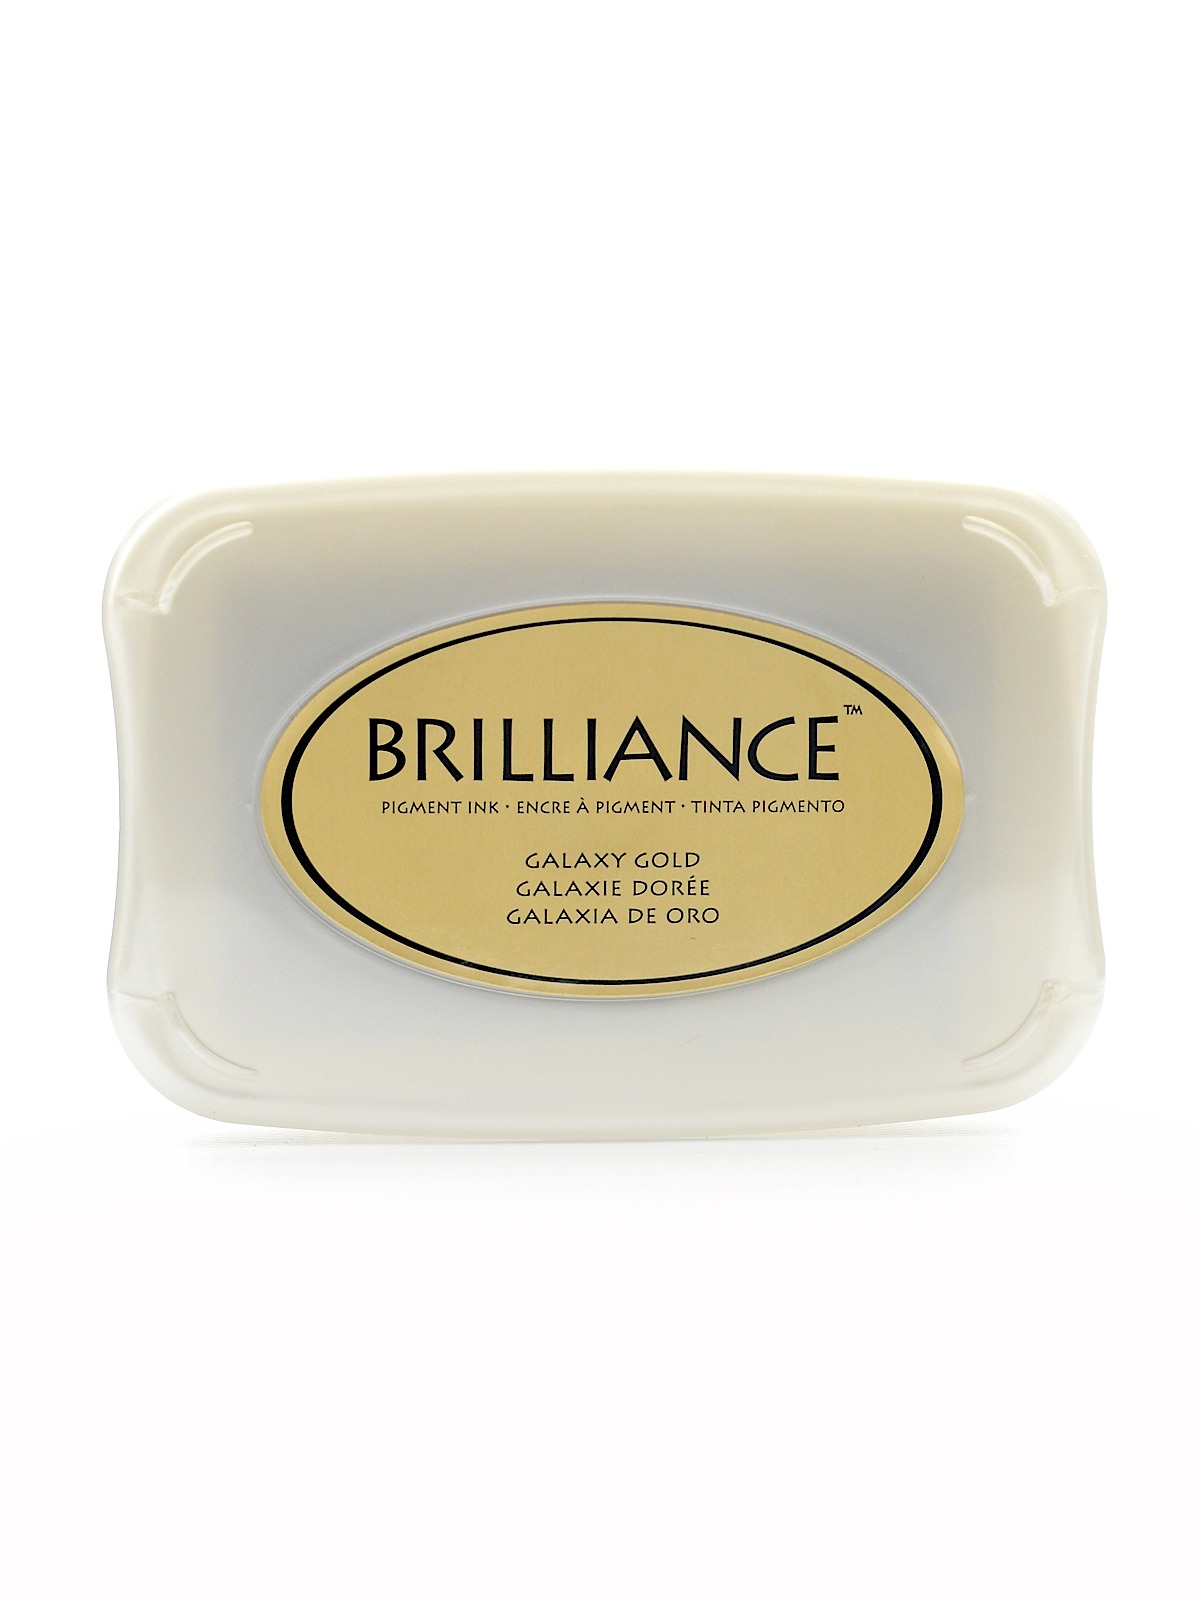 Brilliance Archival Pigment Ink Pearlescent Galaxy Gold 3.75 In. X 2.625 In. Pad